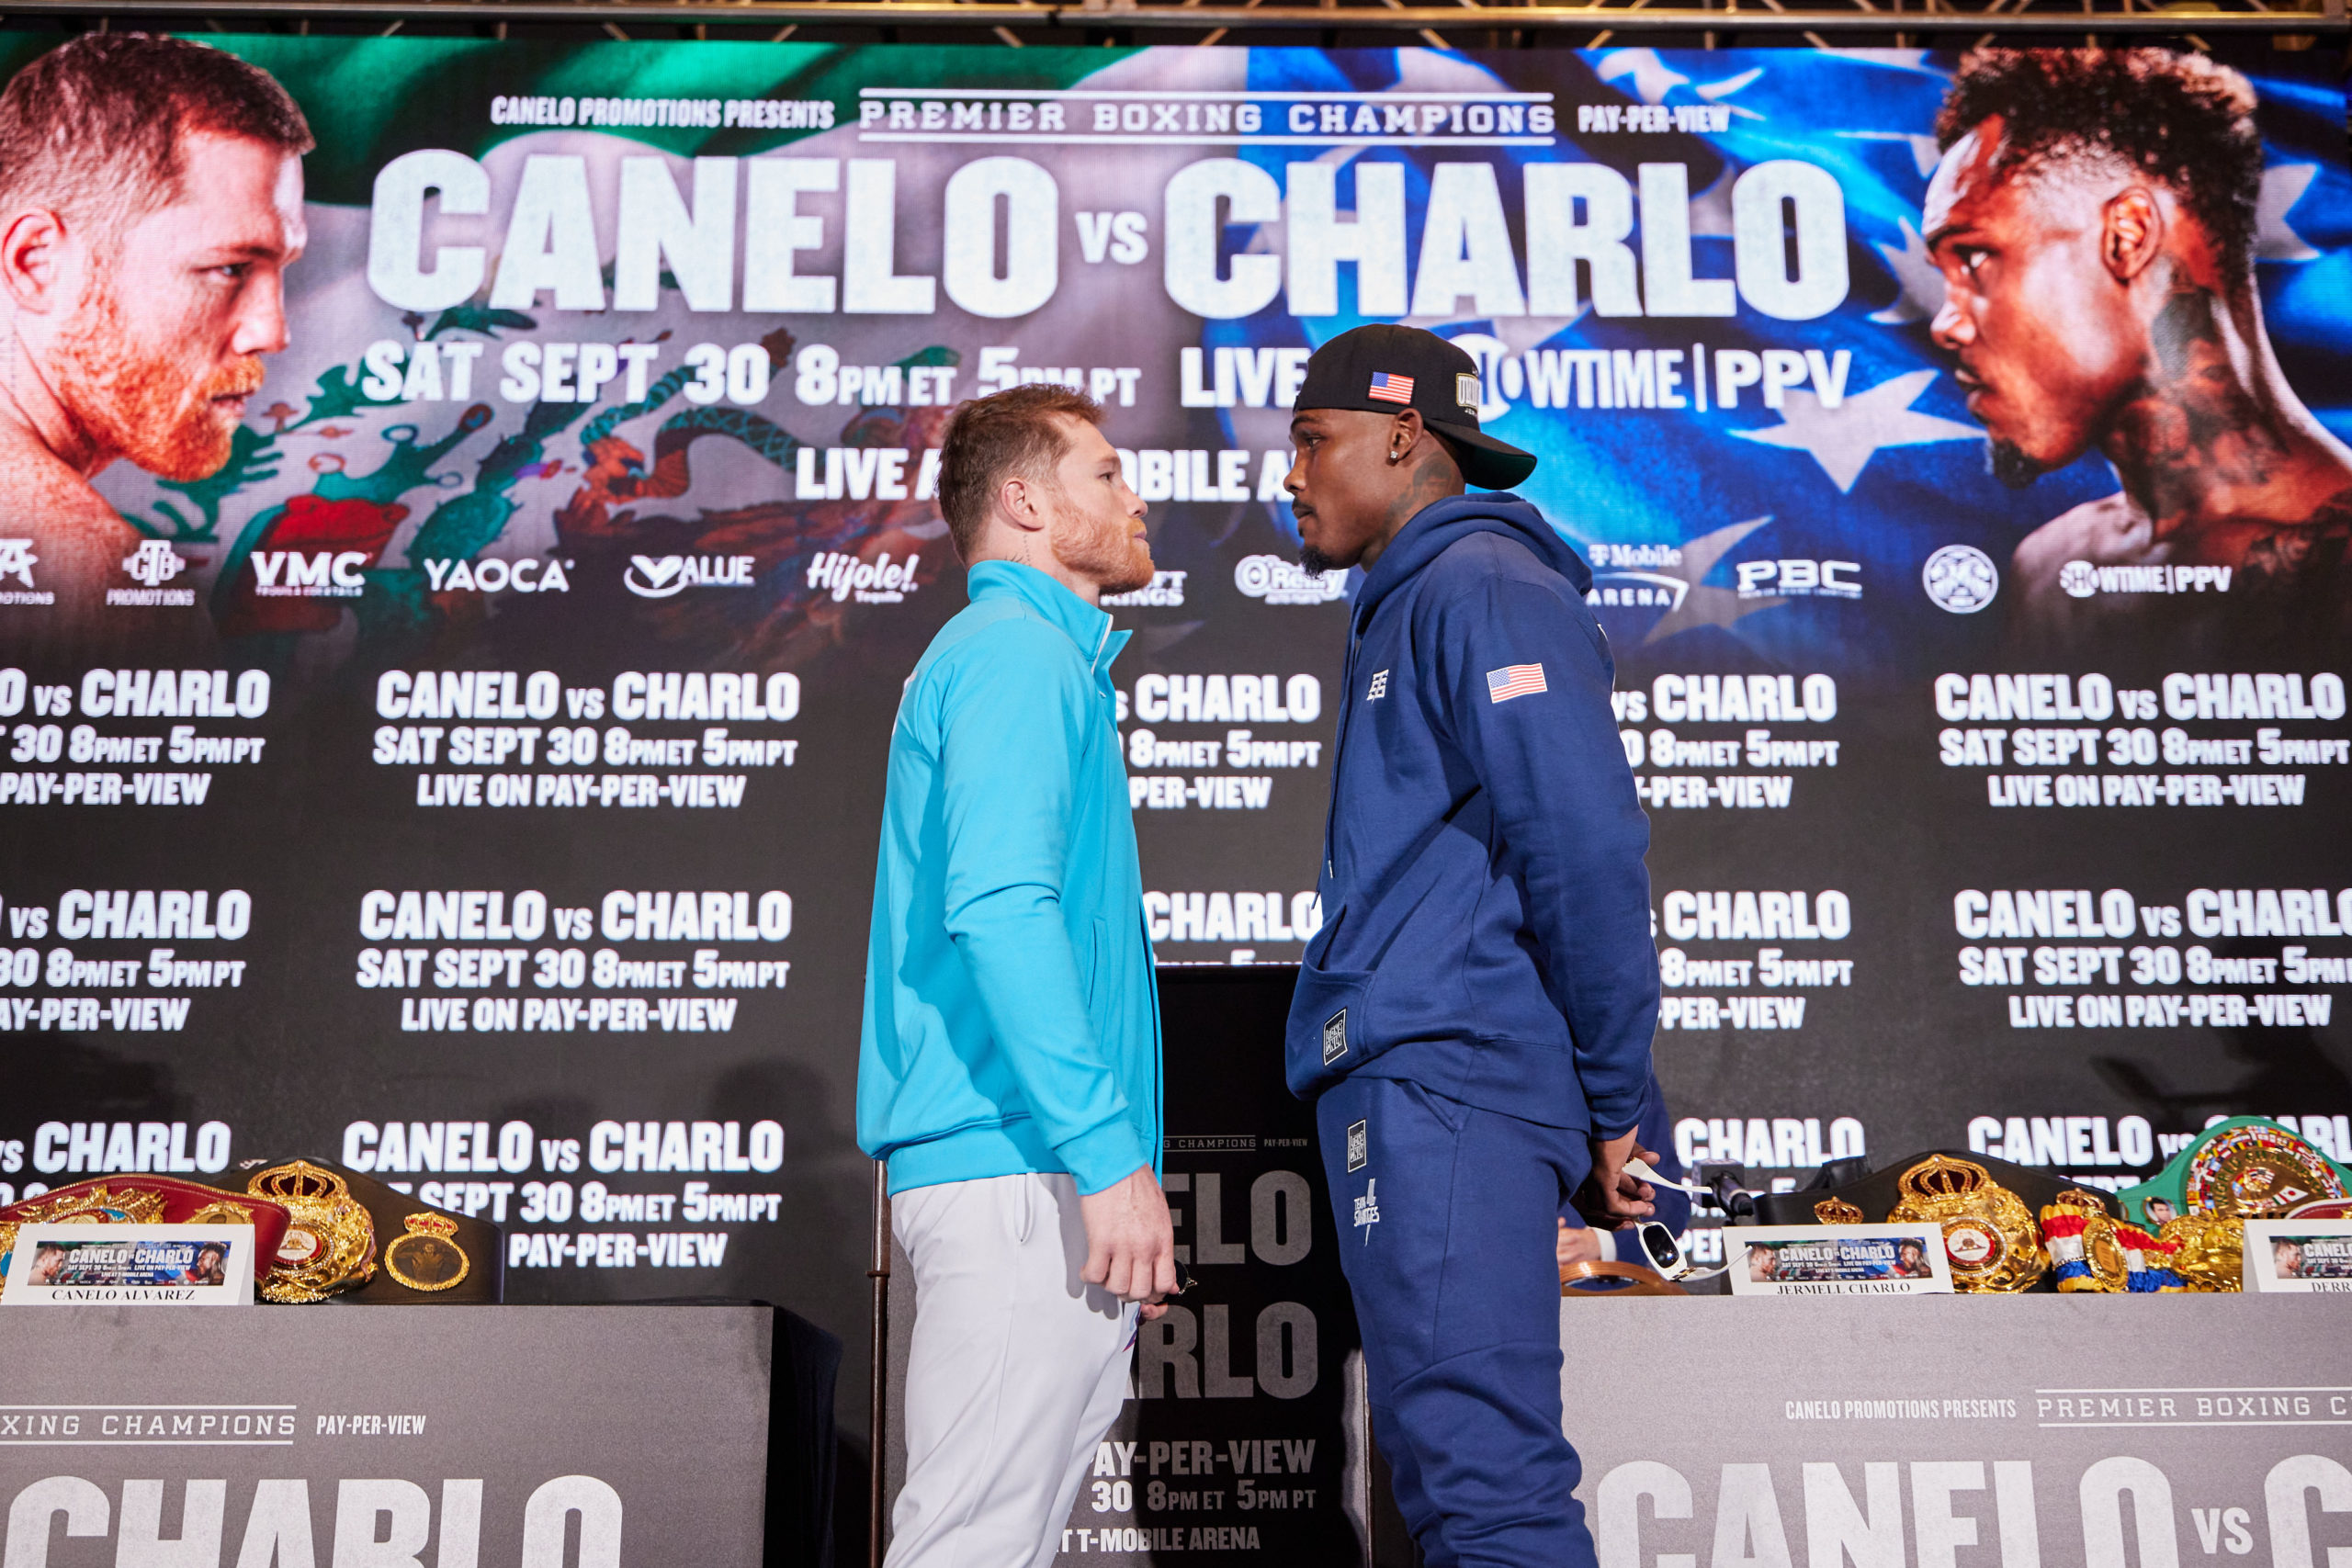 Canelo Alvarez vs. Jermell Charlo A Look at the Numbers